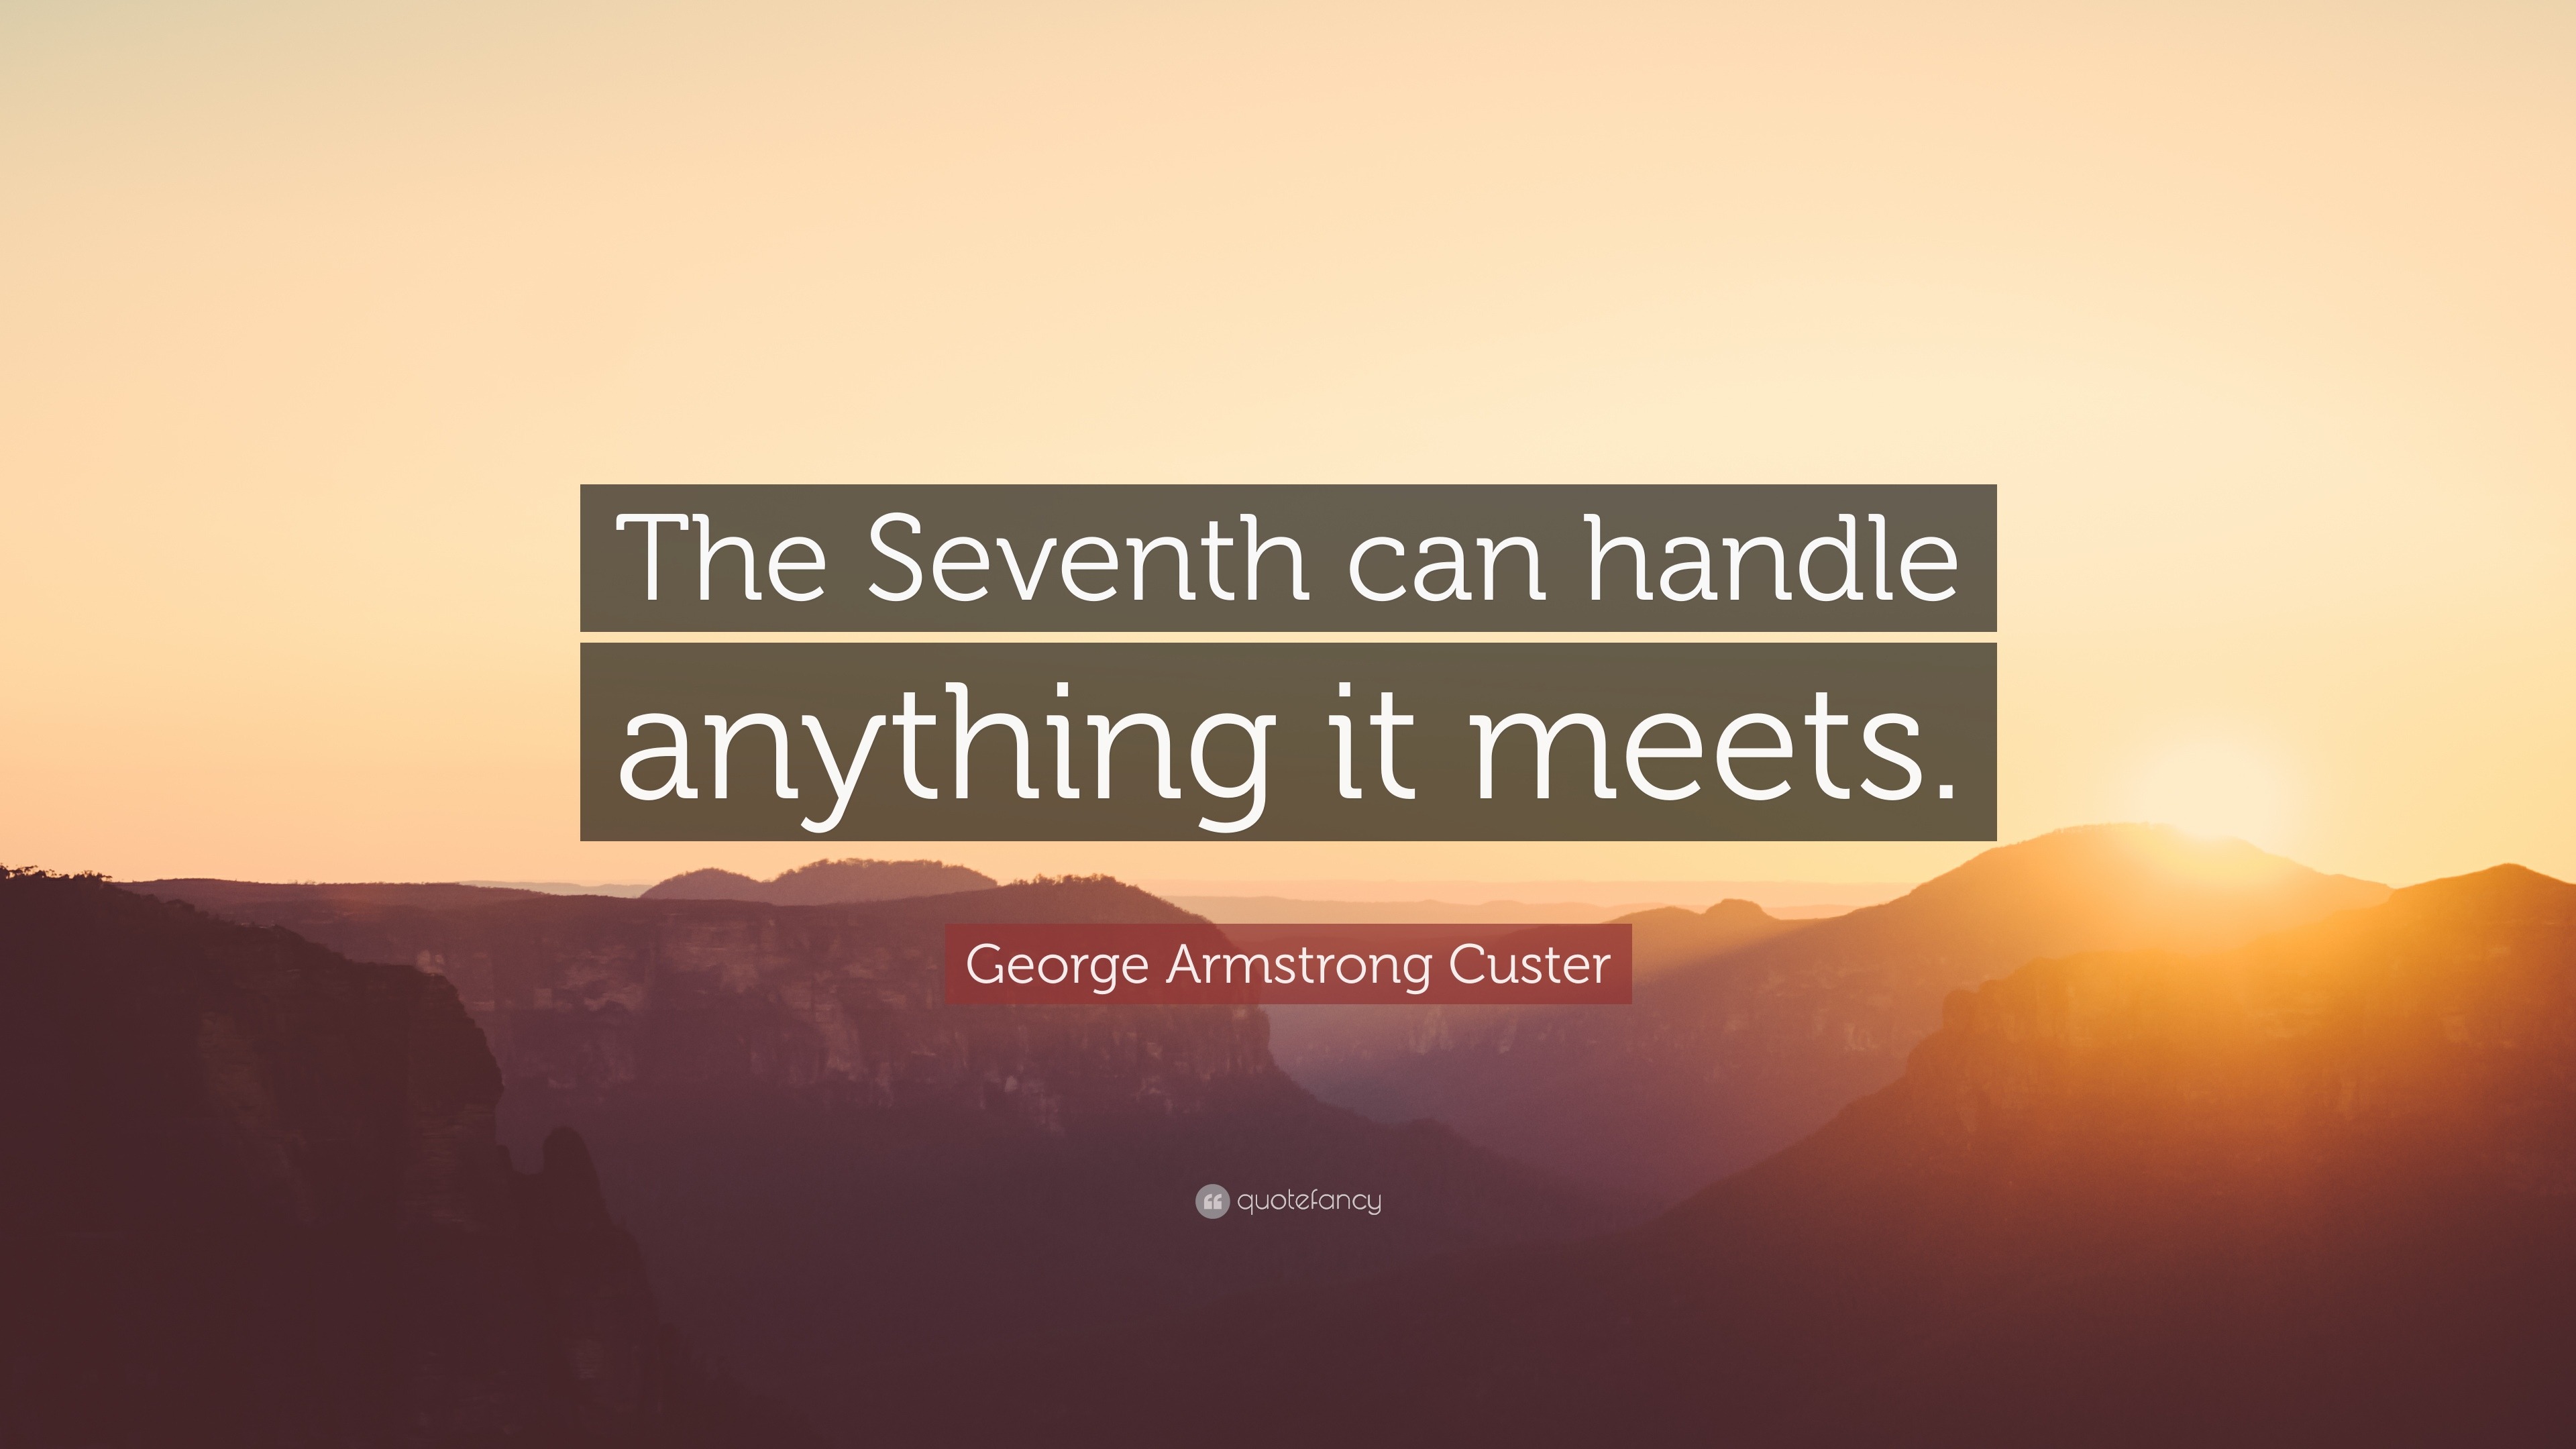 George Armstrong Custer Quotes (10 wallpapers) - Quotefancy